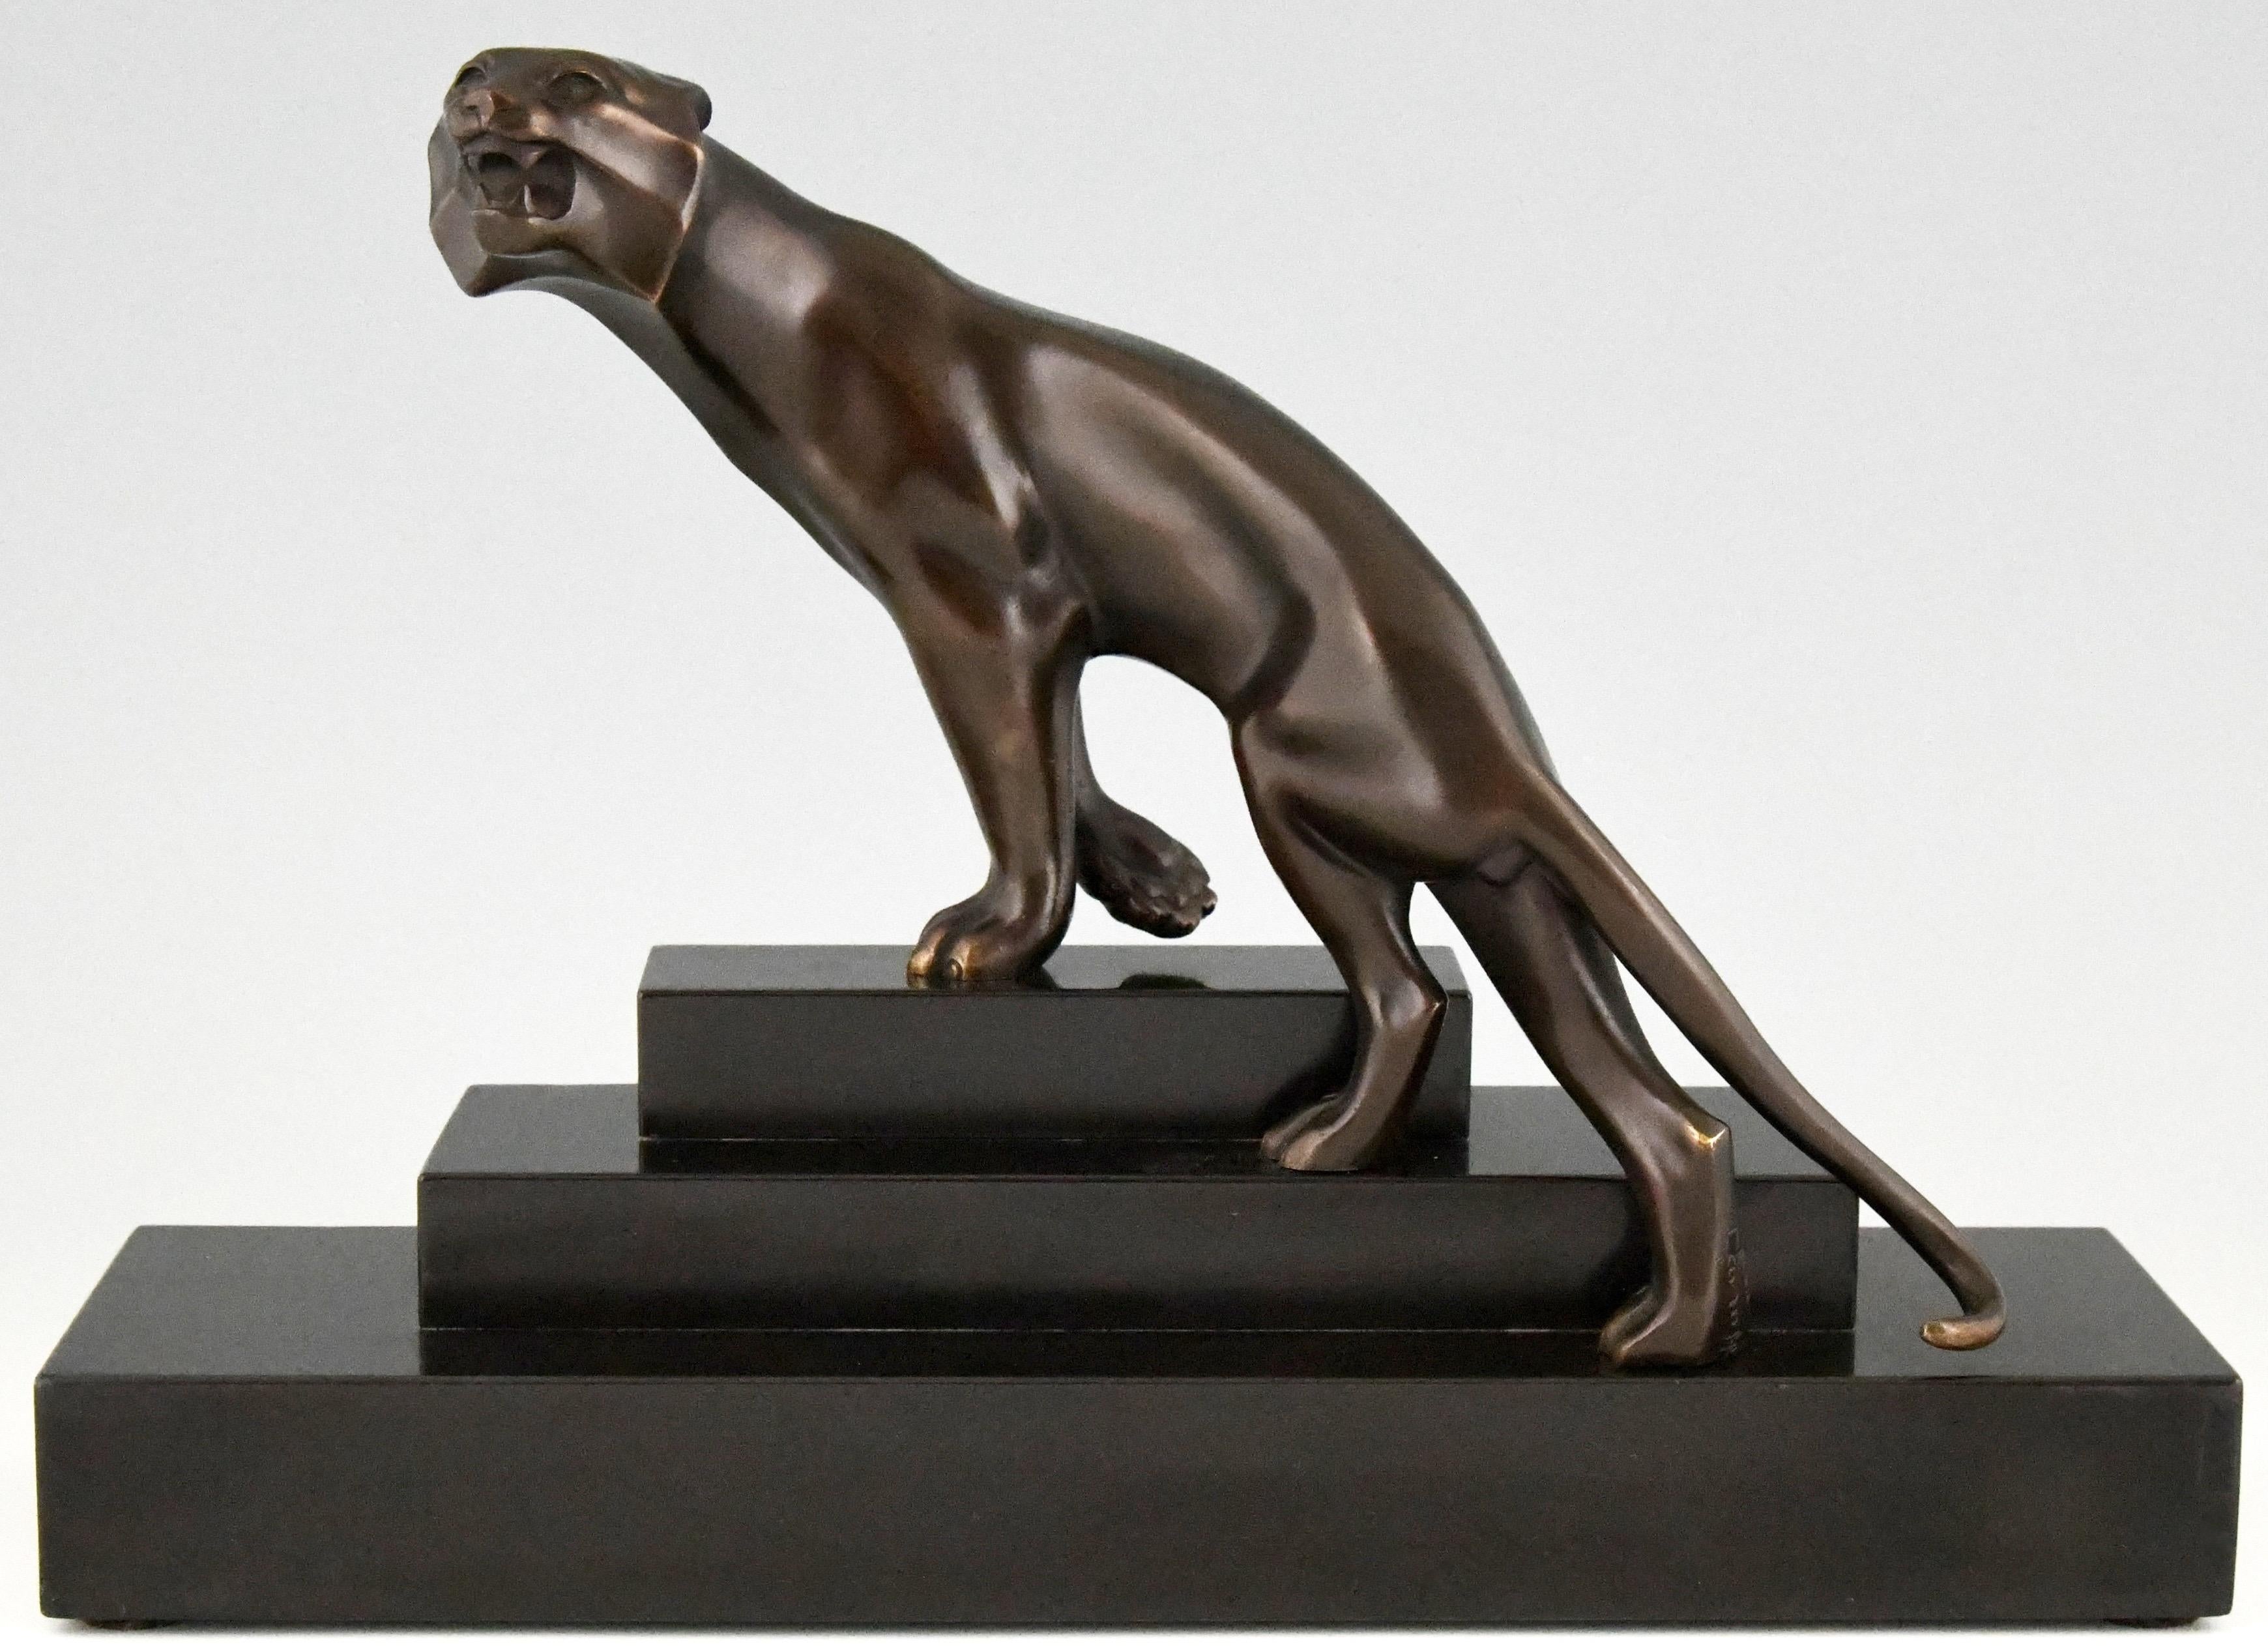 Art Deco bronze sculpture of a panther by Georges Lavroff on a stepped Belgian Black marble base. France 1925. The artist was born in Russia in 1895, he lived and worked in France. Work in Musea and private collections. 
 
This panther is